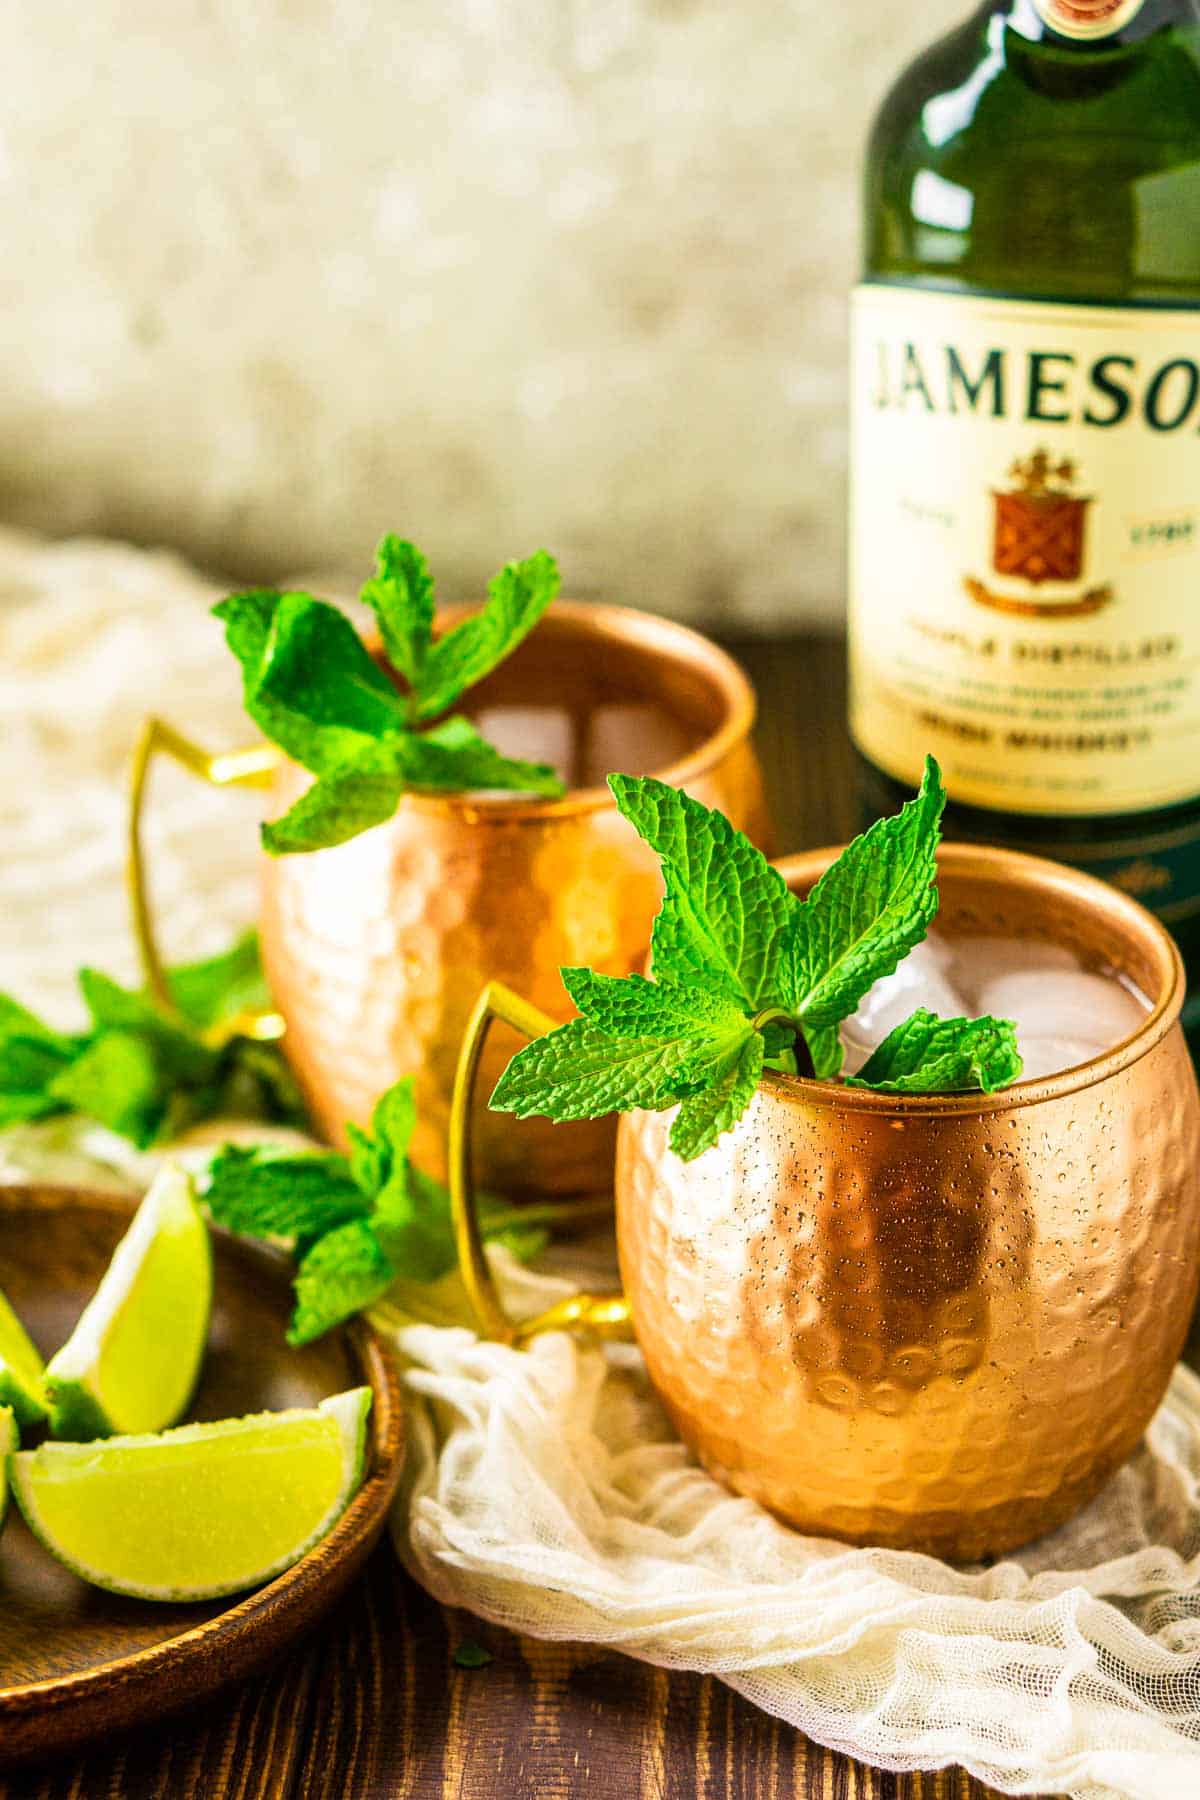 Two Irish mule cocktails on a cream-colored clothe with limes to the side and a bottle of Jameson behind them.